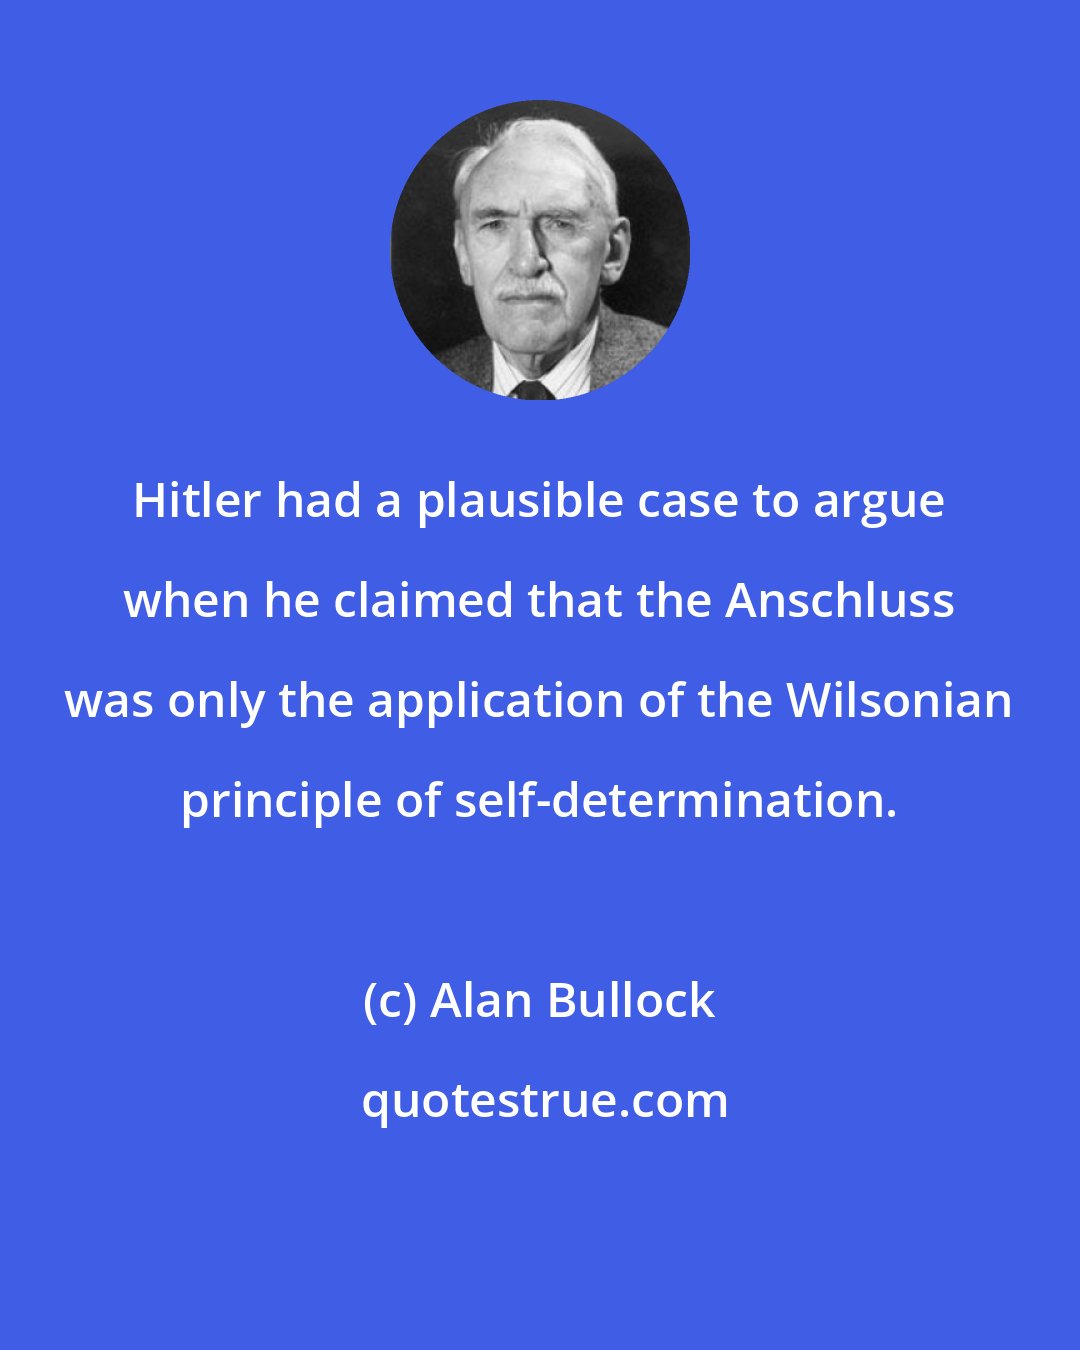 Alan Bullock: Hitler had a plausible case to argue when he claimed that the Anschluss was only the application of the Wilsonian principle of self-determination.